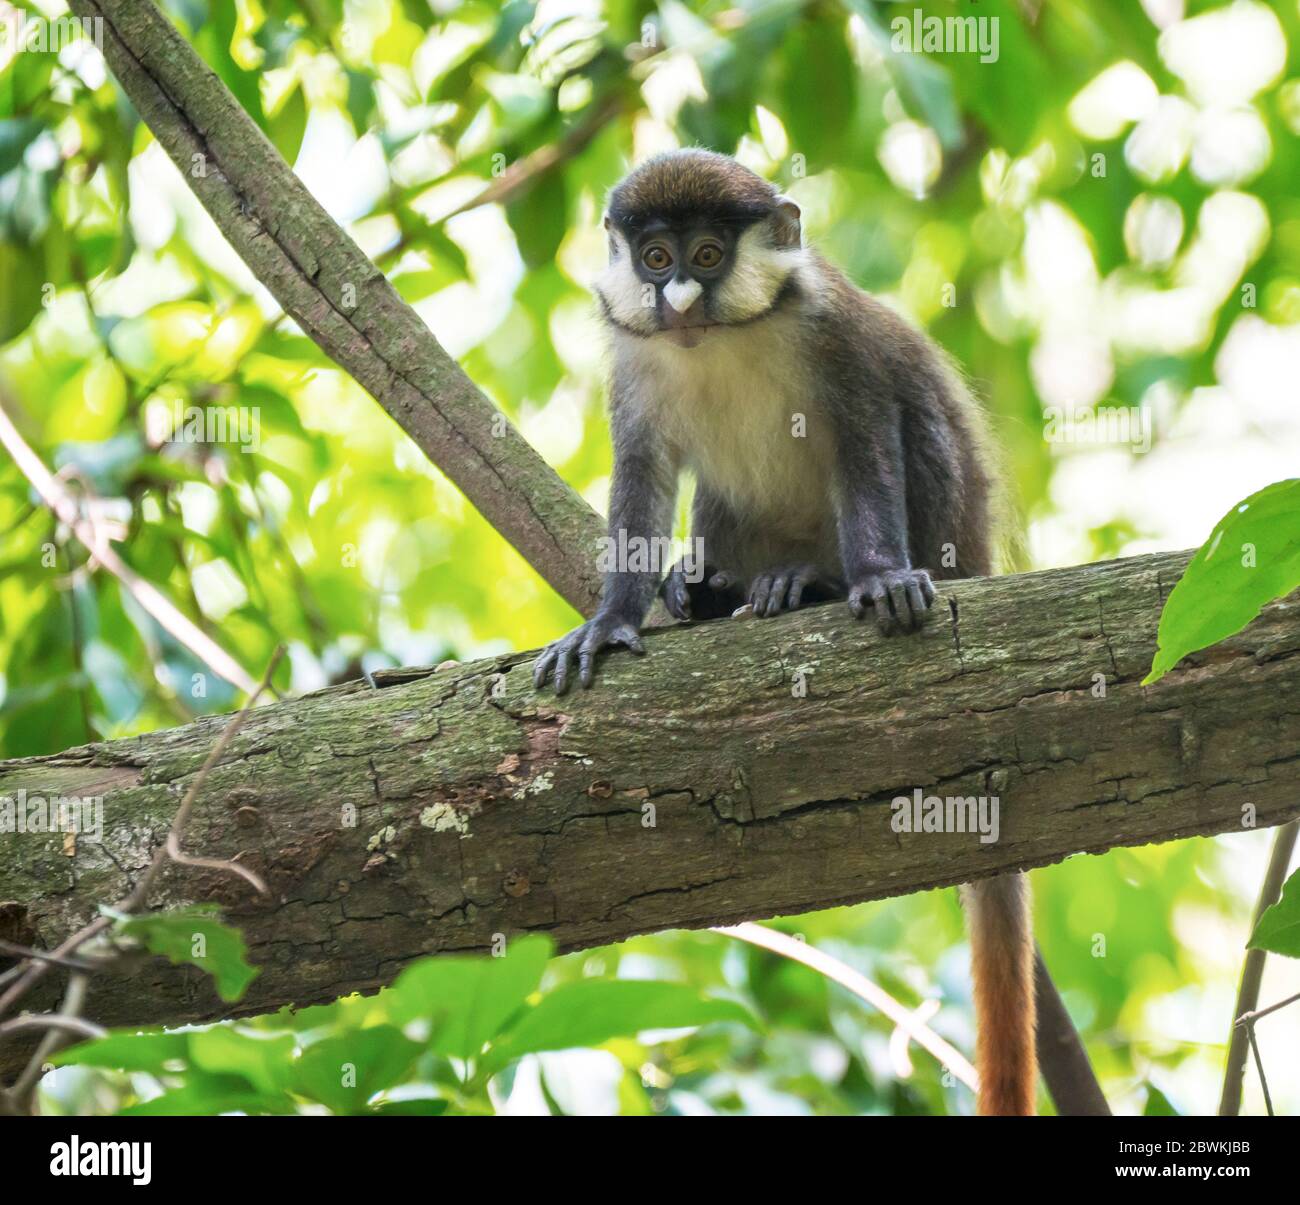 black-cheeked white-nosed monkey, Schmidt's guenon, red-tailed monkey (Cercopithecus ascanius), perched in tree in African woodland, Netherlands, Drenthe Stock Photo